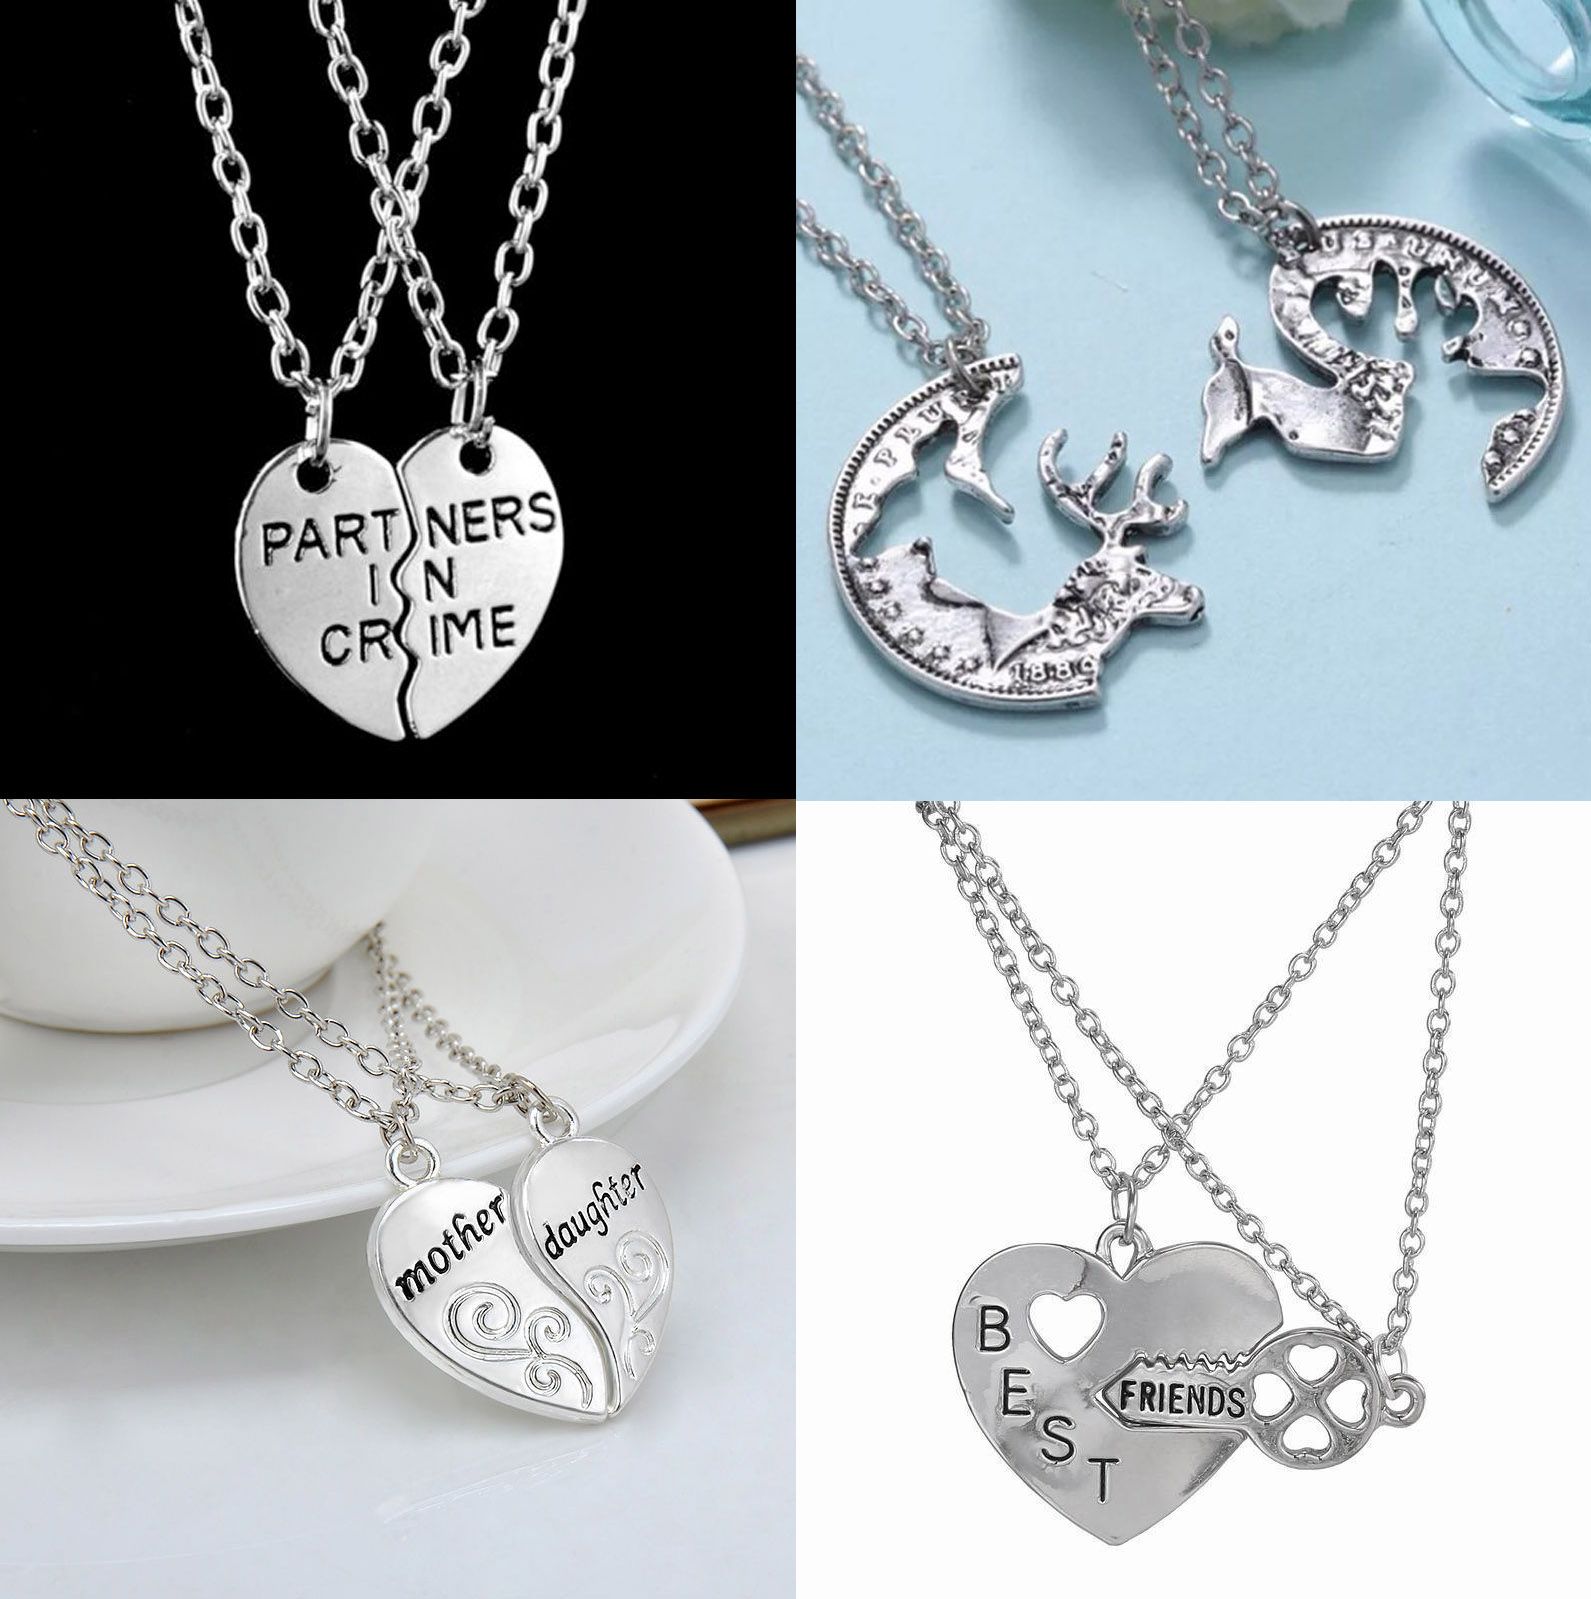 Best Friend Necklaces 2 Pc · Candy Buckingham's · Online Store Intended For Newest Best Friends Heart & Key Necklaces Pendant Necklaces (View 24 of 25)